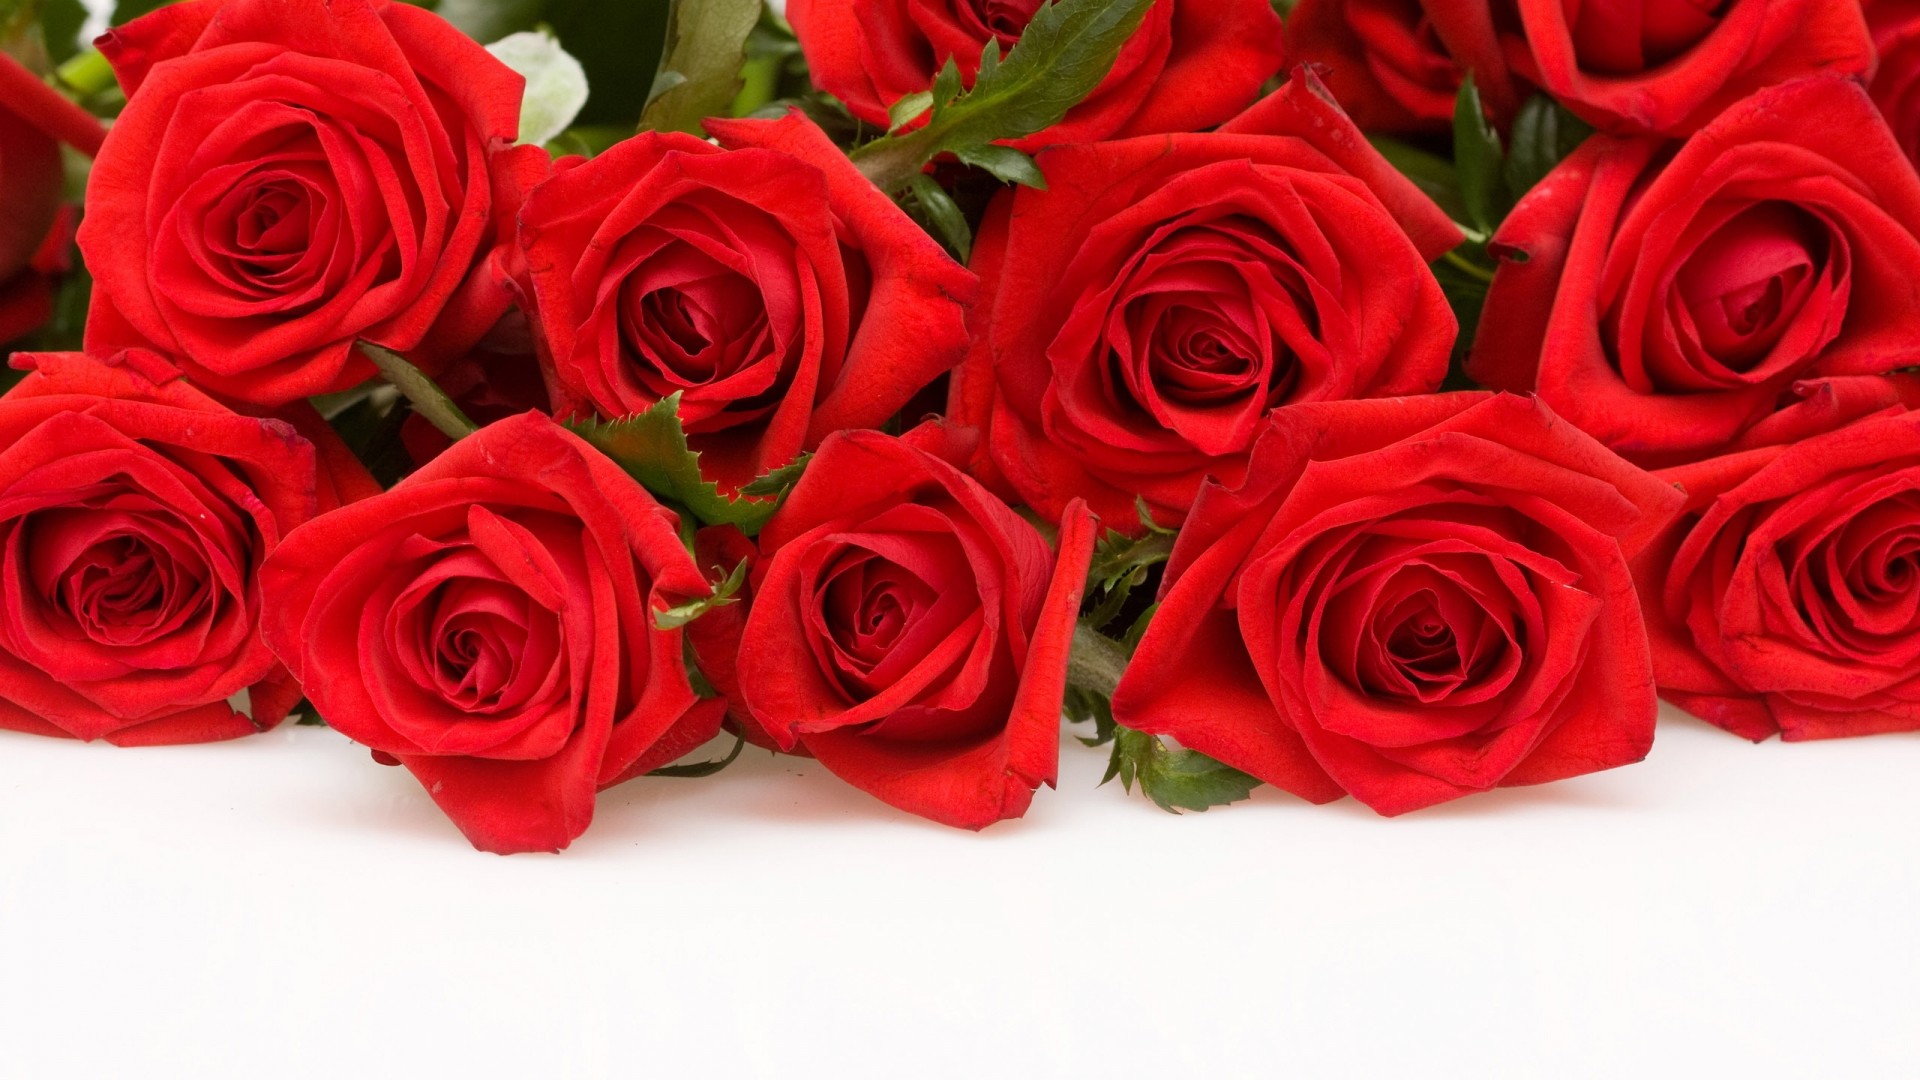 1920x1080 Red Rose Wallpaper Flowers Nature Wallpapers in jpg format for